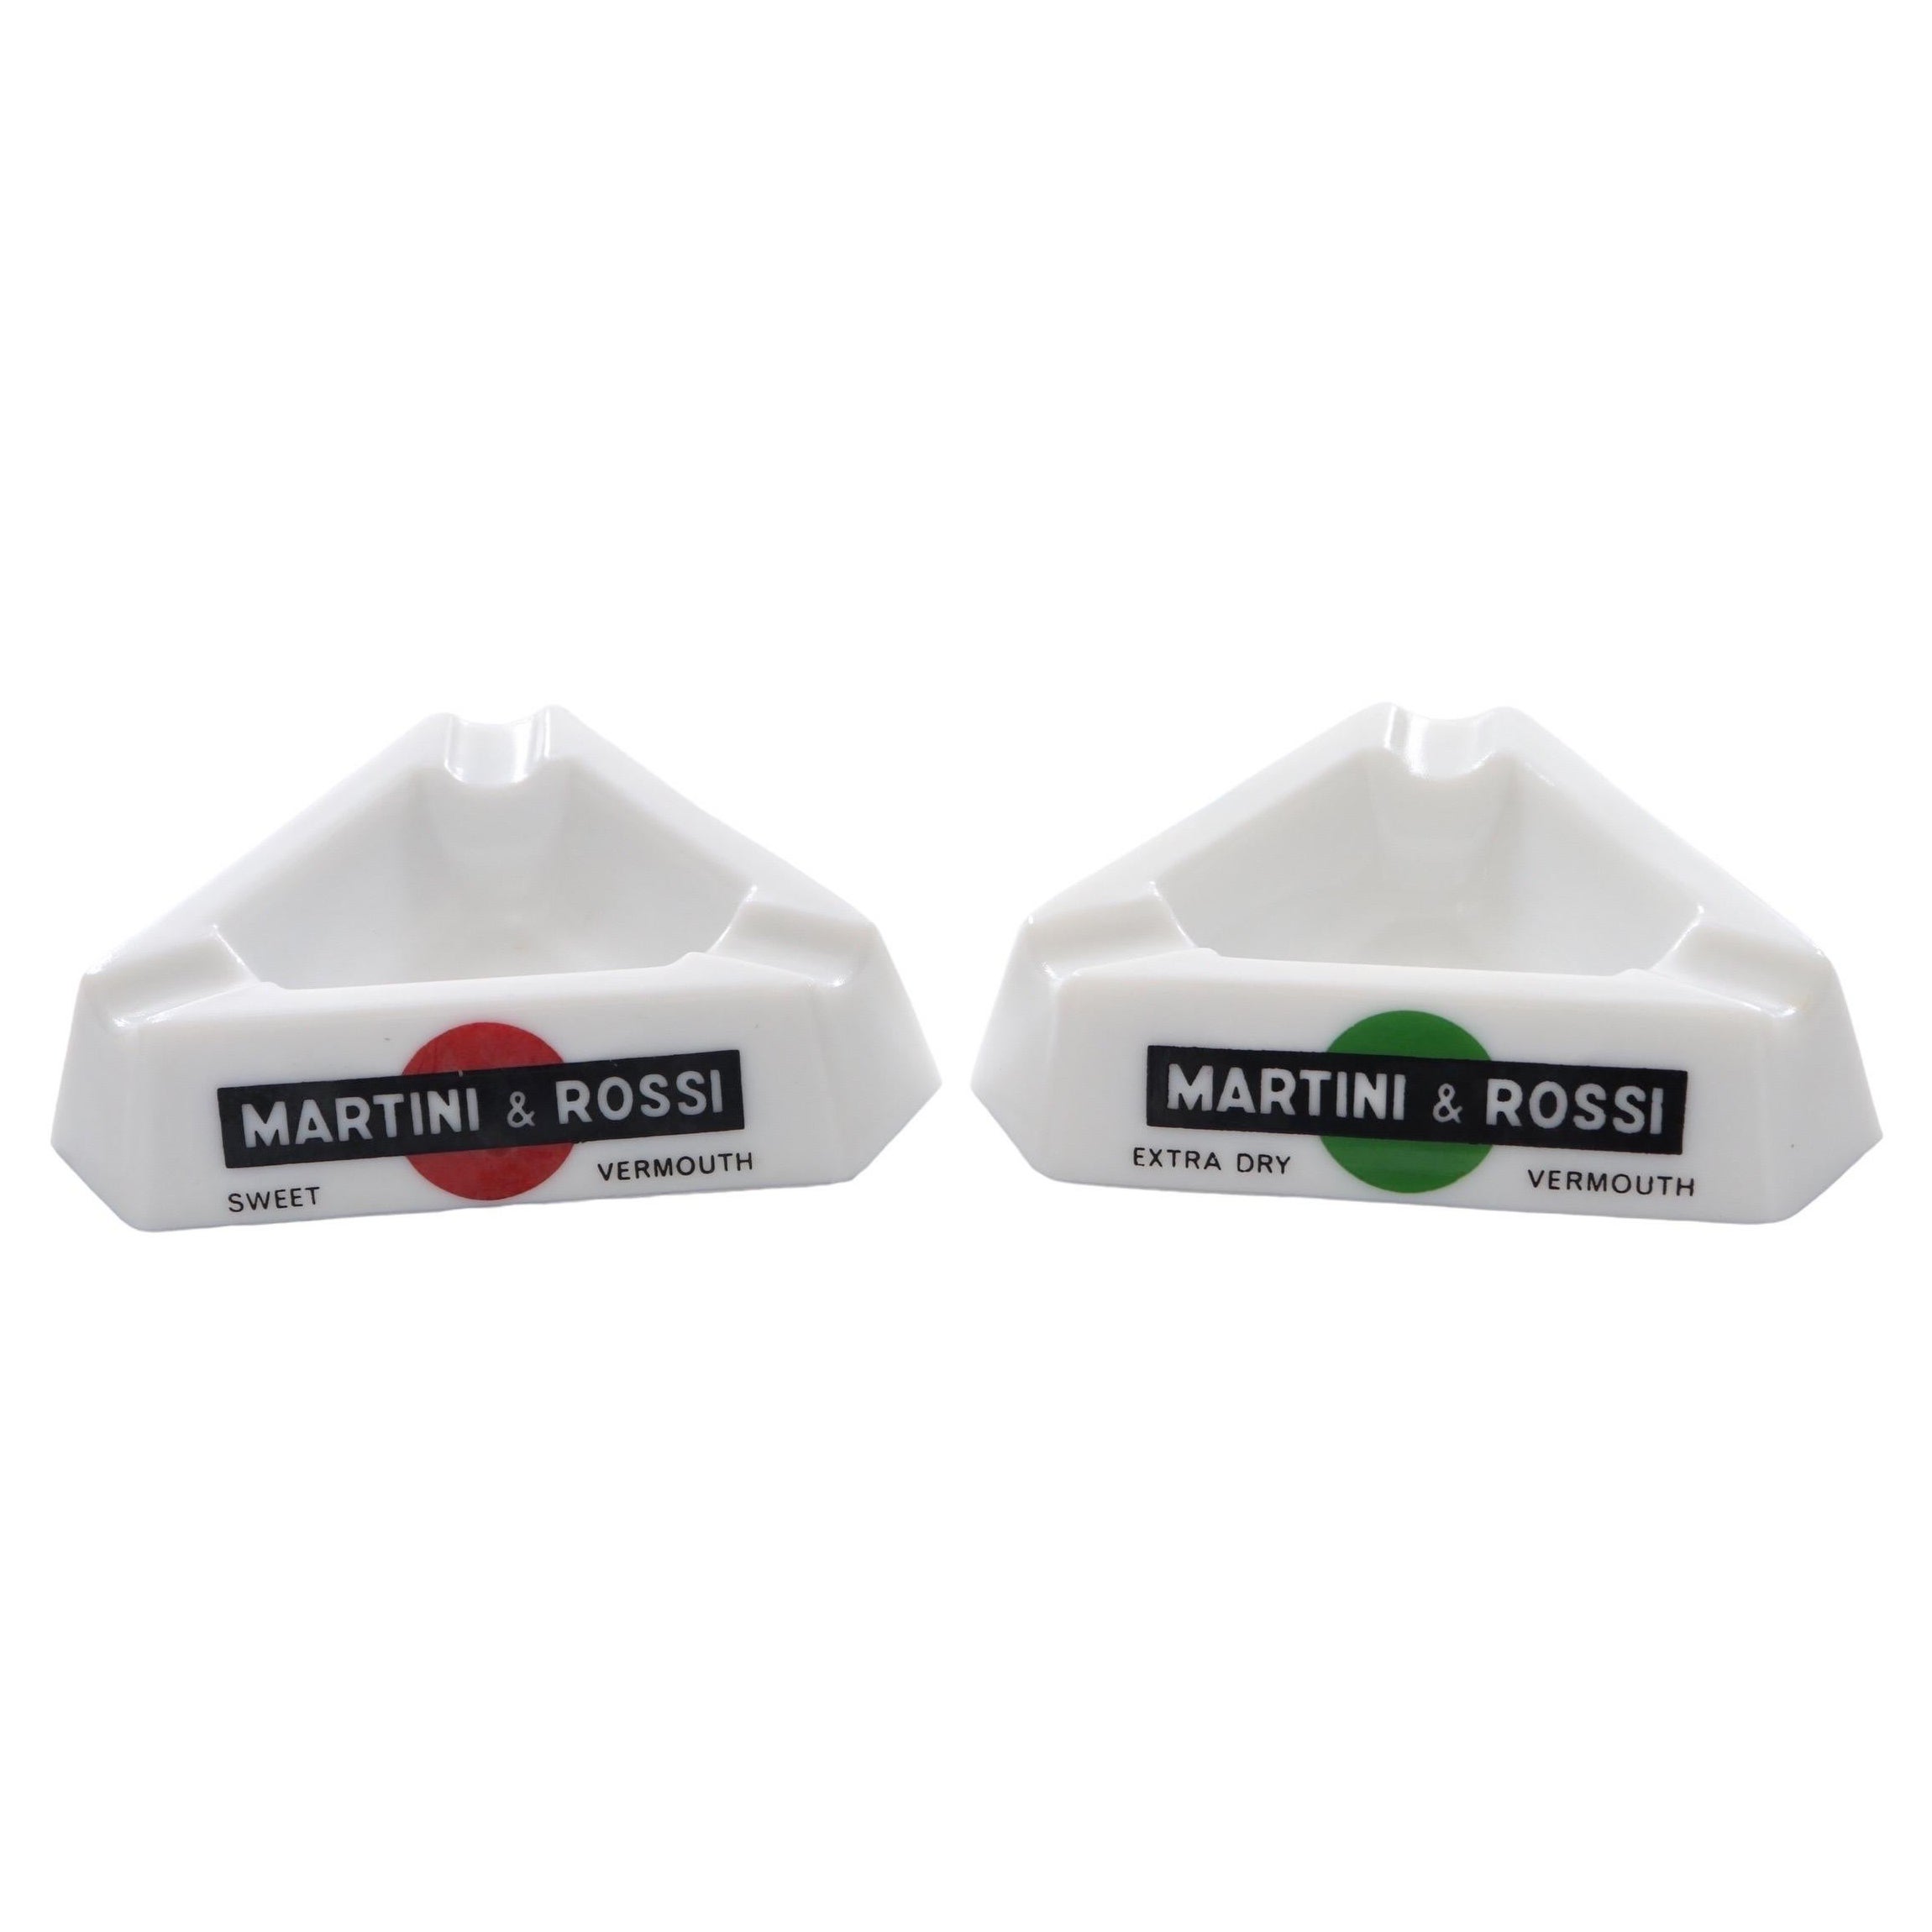 Martini & Rossi French Opalex Ashtrays, a Pair For Sale